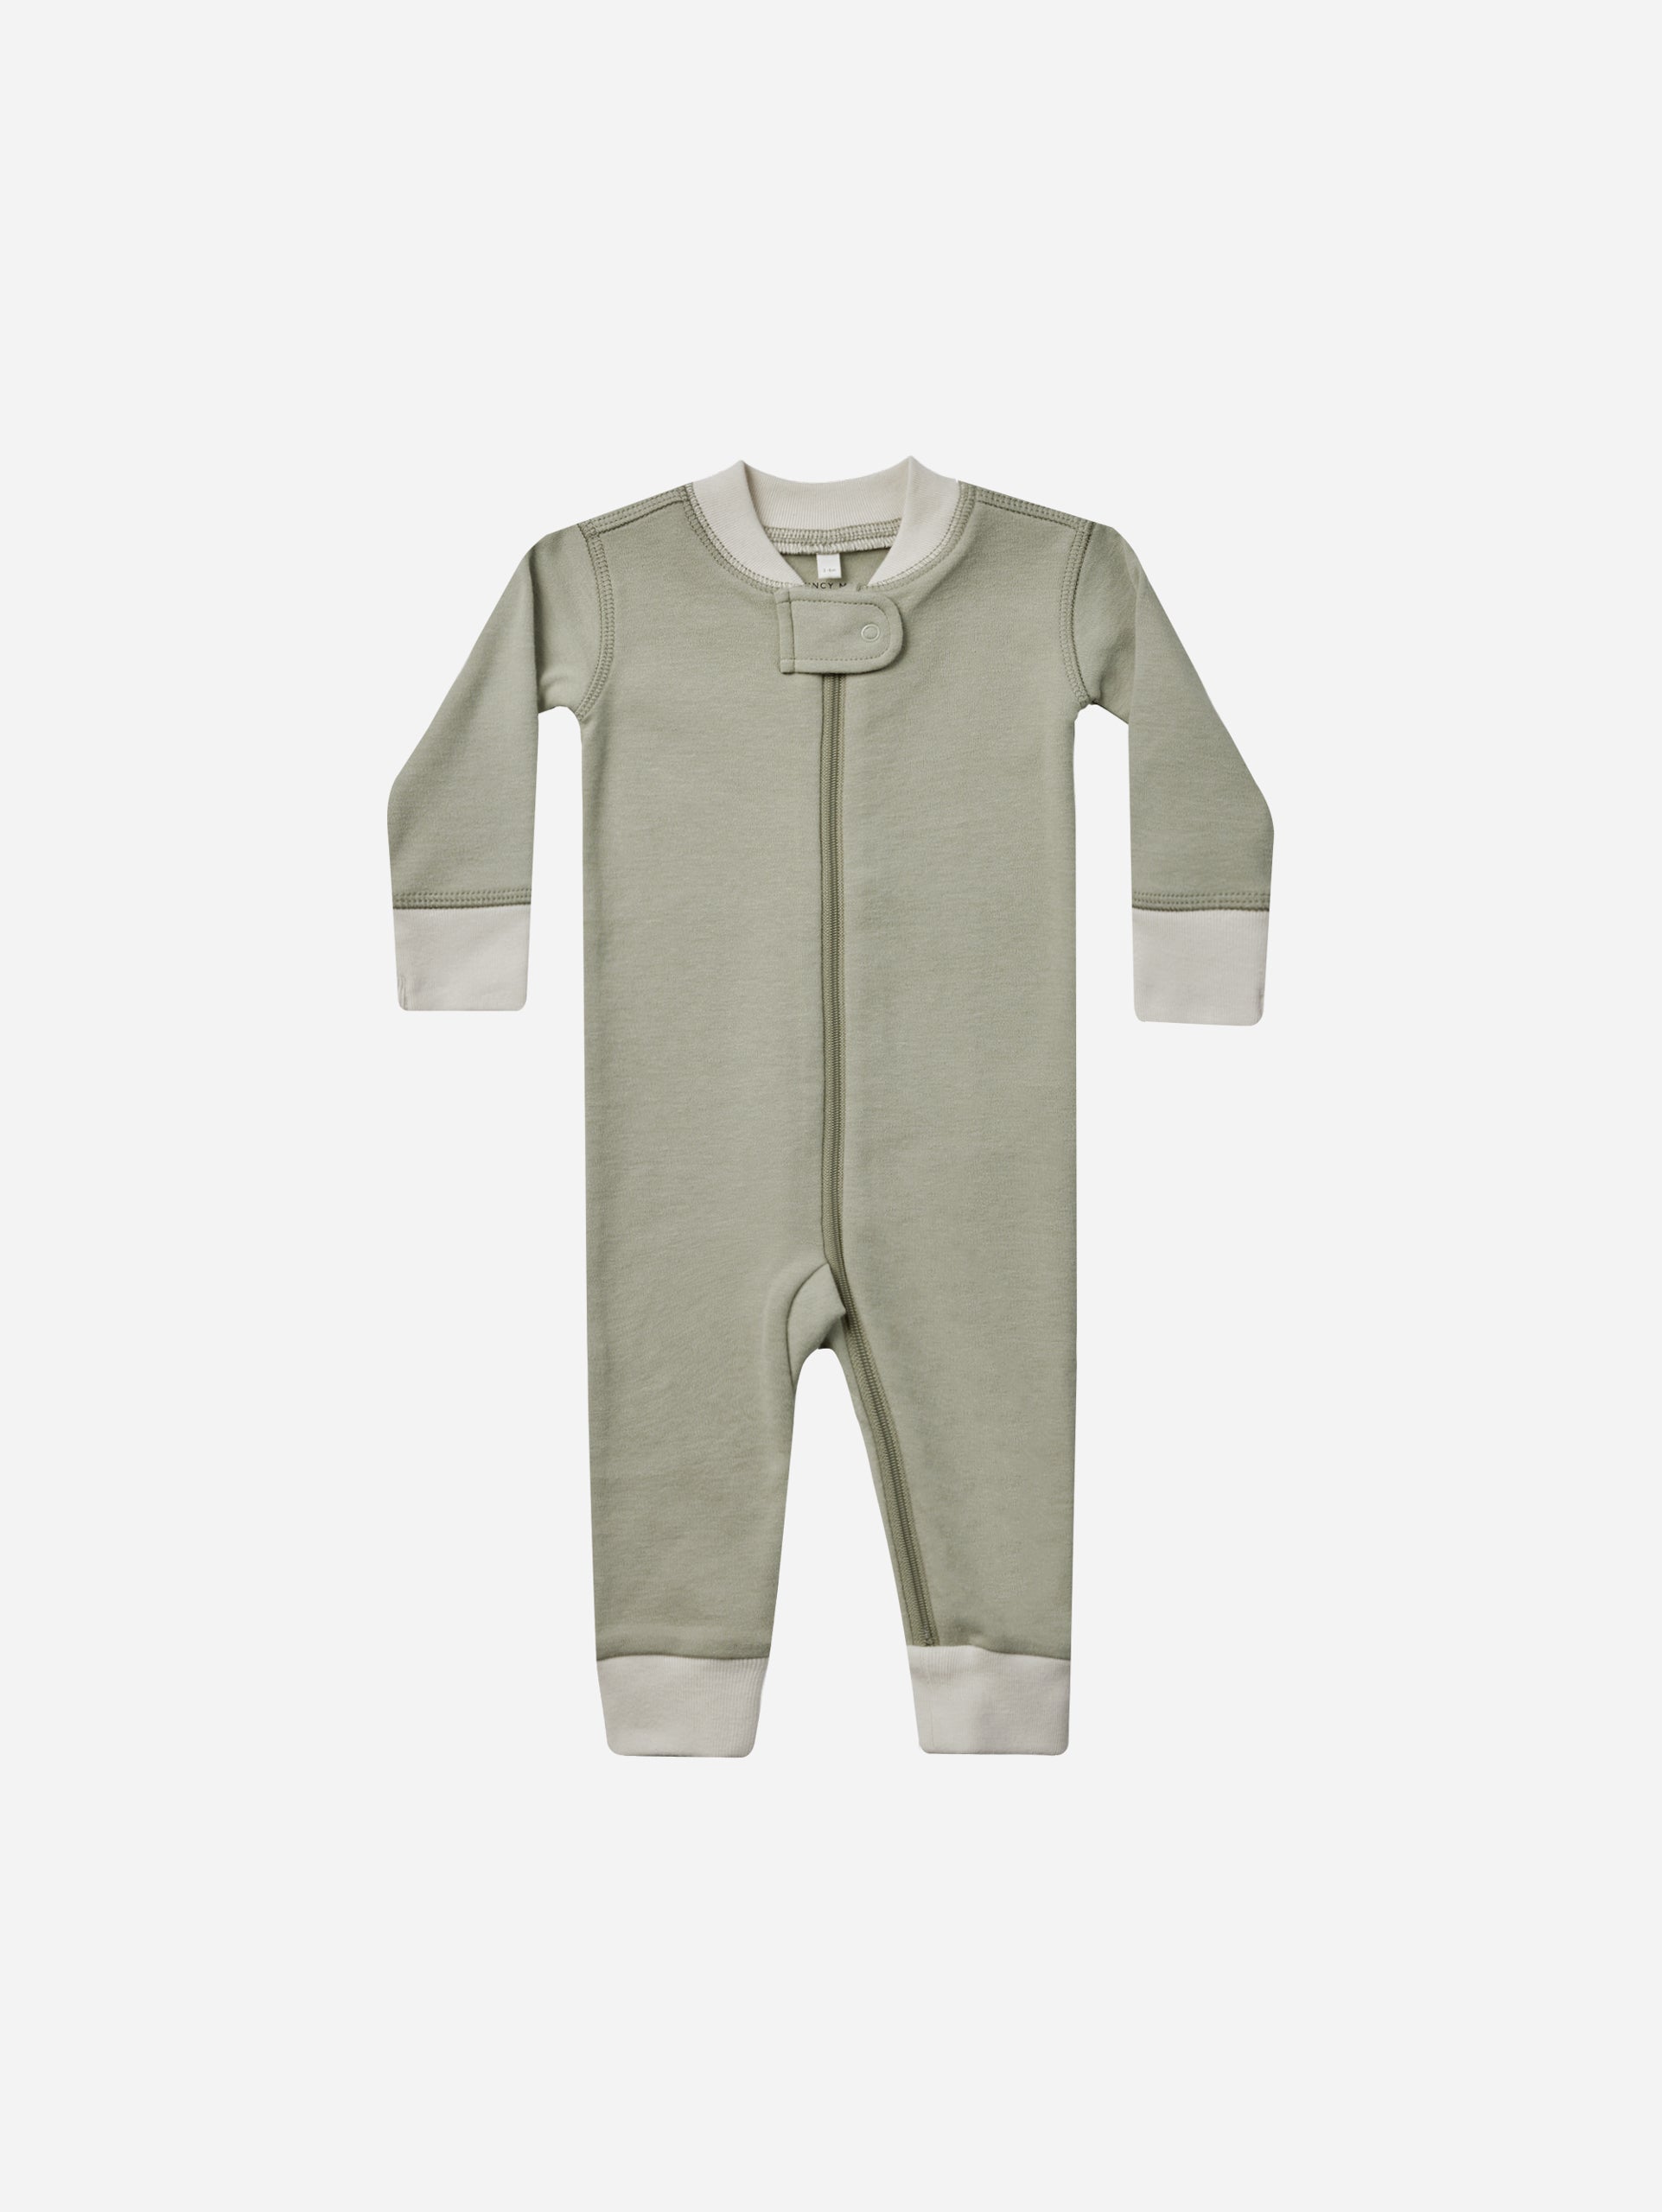 Zip Long Sleeve Sleeper || Sage - Rylee + Cru | Kids Clothes | Trendy Baby Clothes | Modern Infant Outfits |